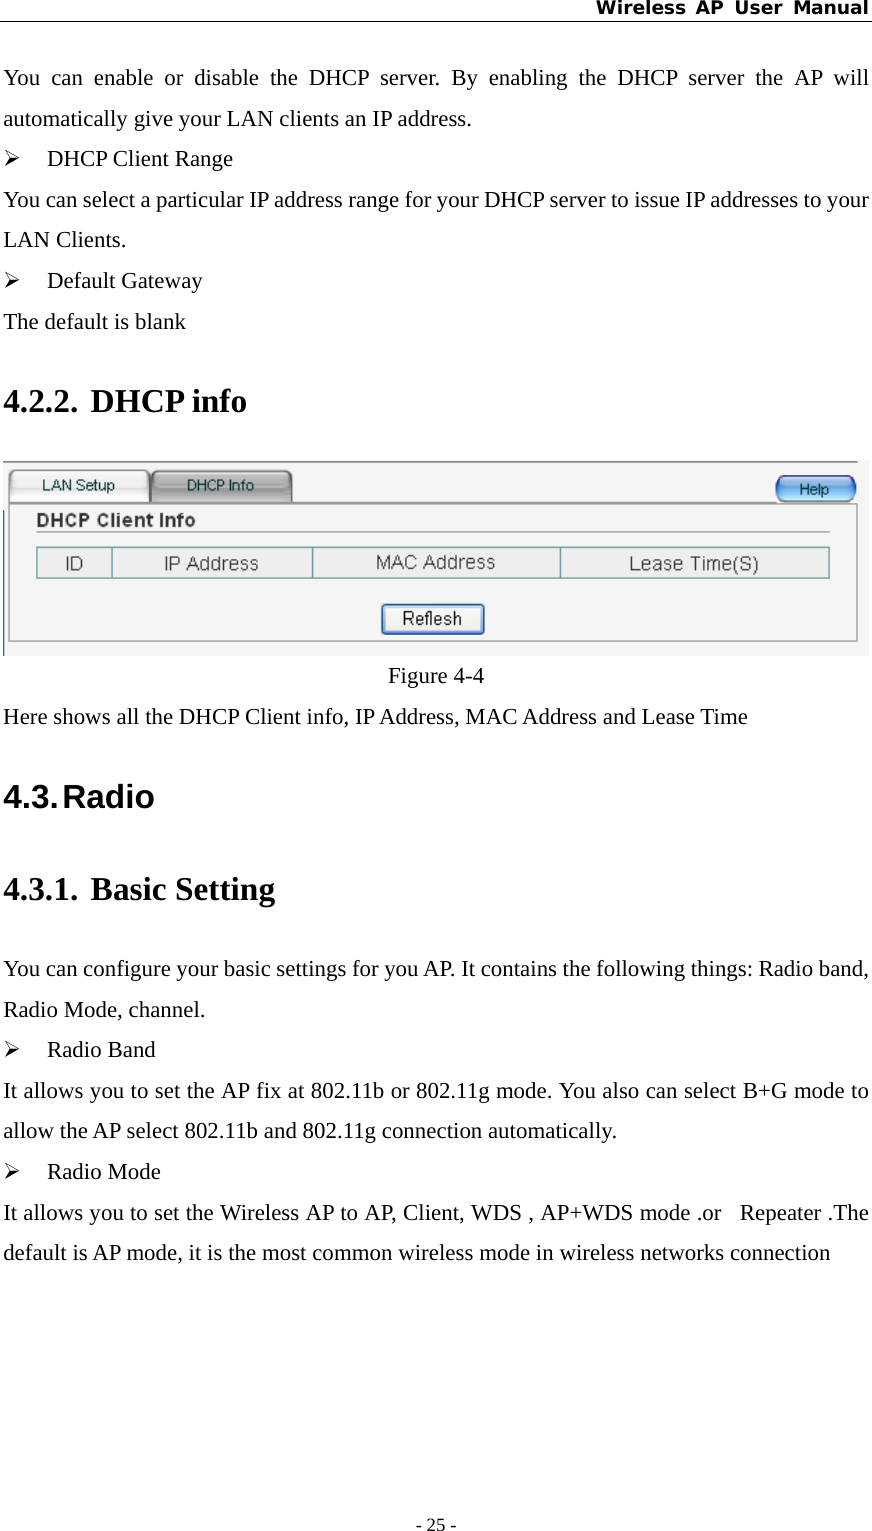 Wireless AP User Manual - 25 -  You can enable or disable the DHCP server. By enabling the DHCP server the AP will automatically give your LAN clients an IP address. ¾ DHCP Client Range You can select a particular IP address range for your DHCP server to issue IP addresses to your LAN Clients. ¾ Default Gateway The default is blank 4.2.2. DHCP info  Figure 4-4 Here shows all the DHCP Client info, IP Address, MAC Address and Lease Time 4.3. Radio 4.3.1. Basic Setting   You can configure your basic settings for you AP. It contains the following things: Radio band, Radio Mode, channel. ¾ Radio Band It allows you to set the AP fix at 802.11b or 802.11g mode. You also can select B+G mode to allow the AP select 802.11b and 802.11g connection automatically. ¾ Radio Mode It allows you to set the Wireless AP to AP, Client, WDS , AP+WDS mode .or  Repeater .The default is AP mode, it is the most common wireless mode in wireless networks connection 